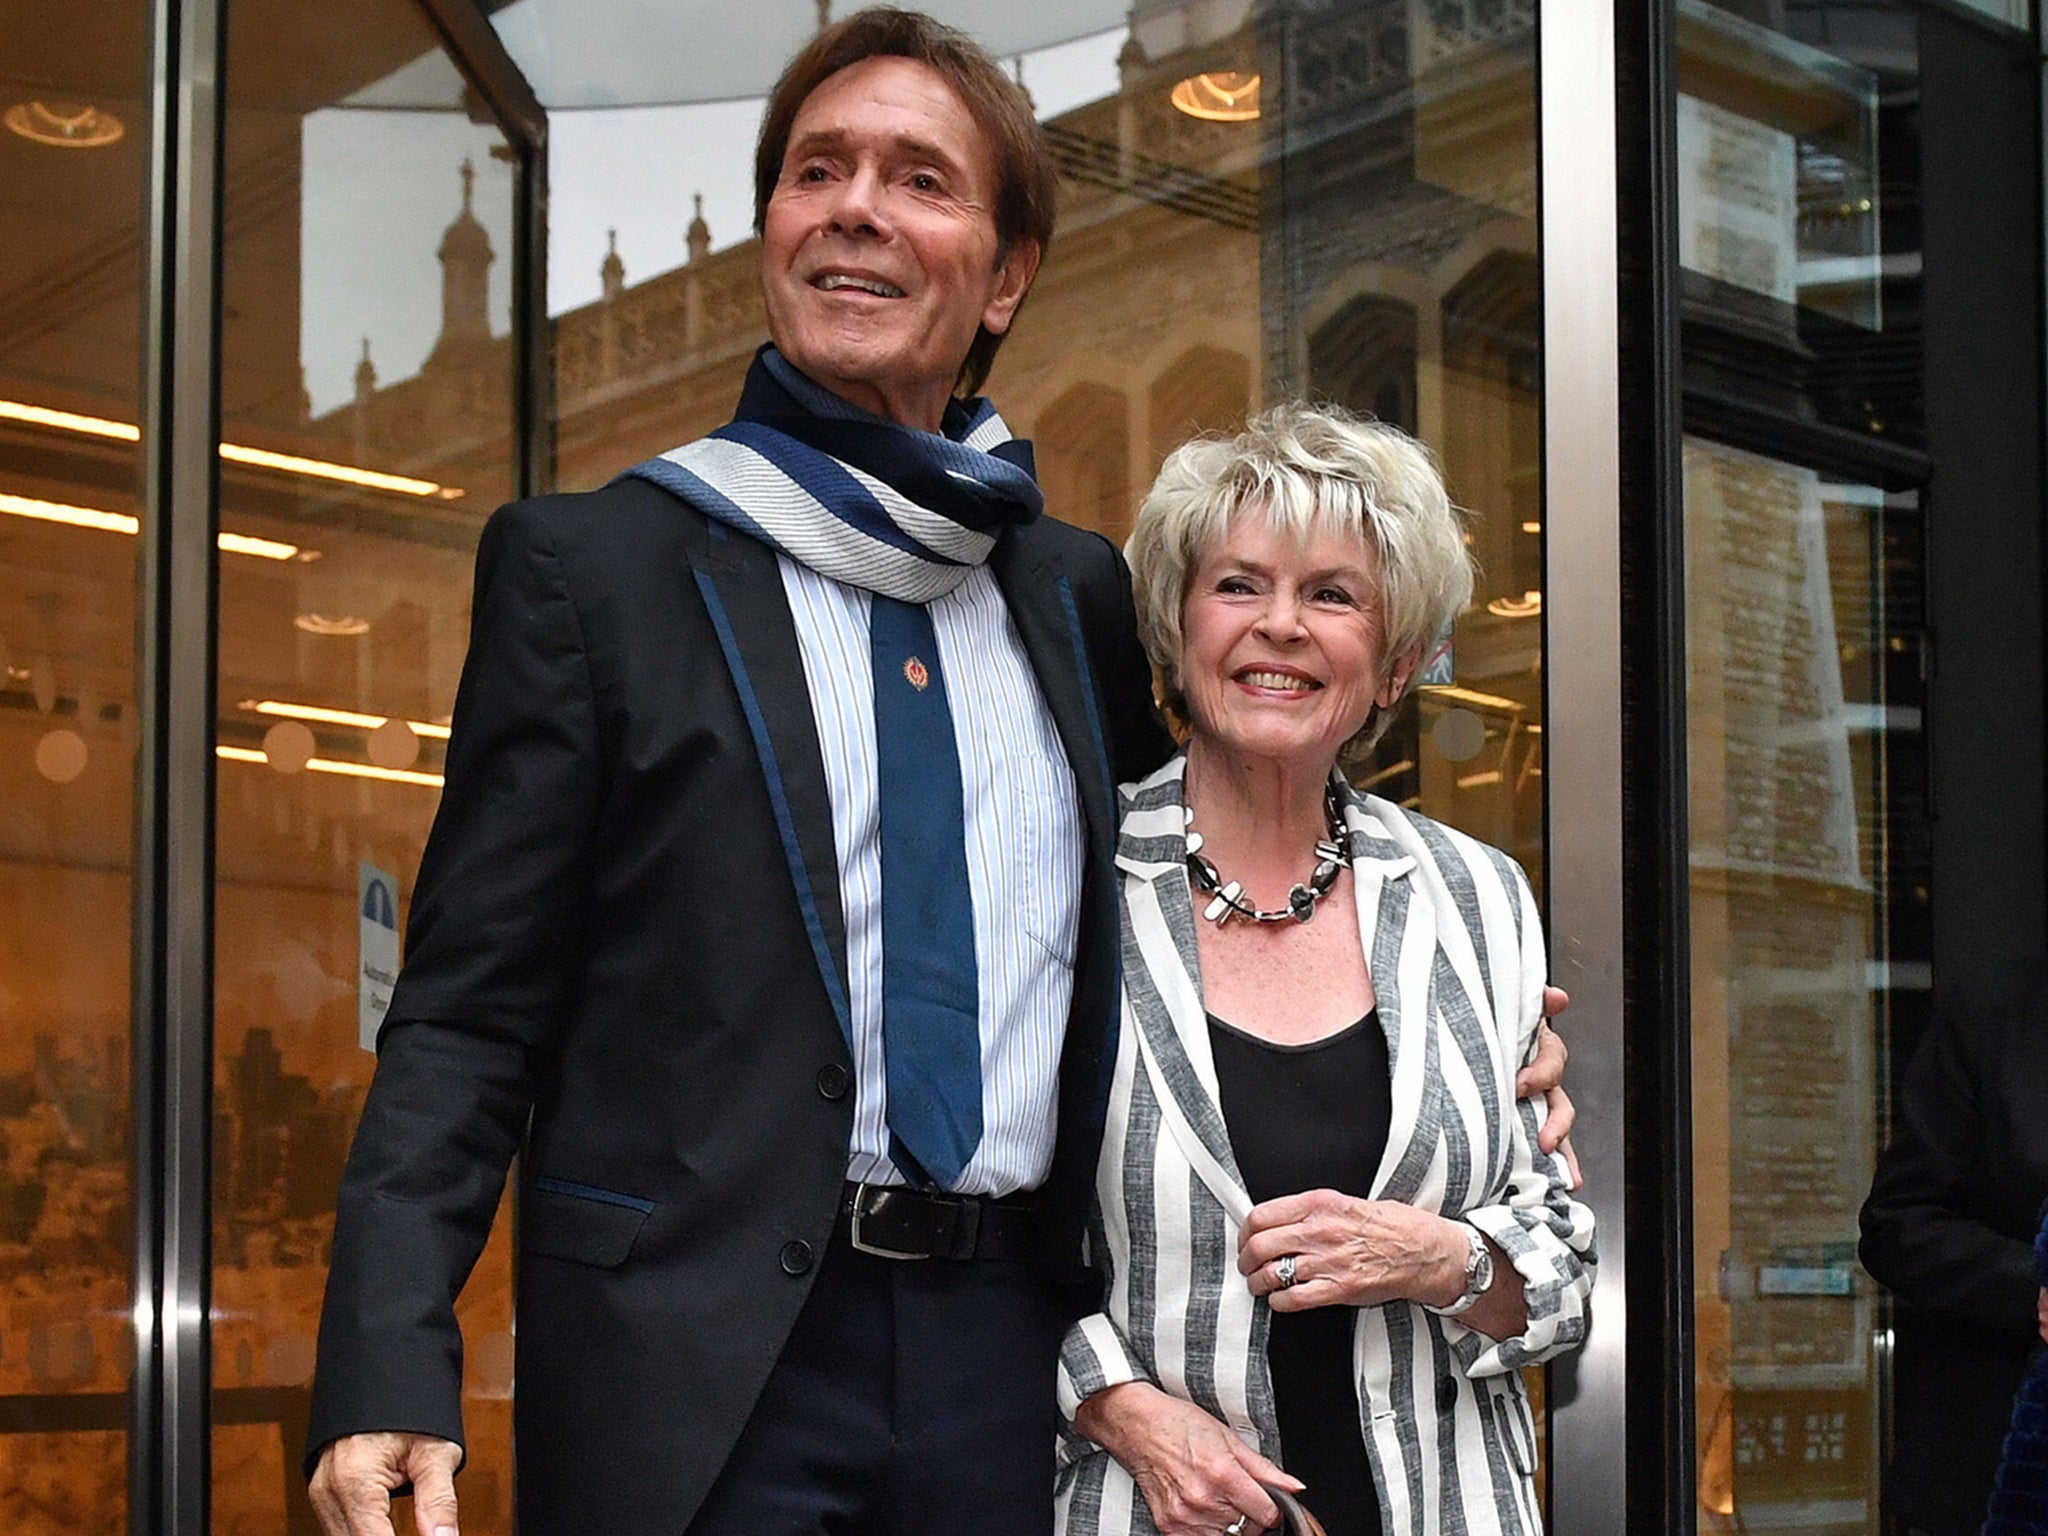 Sir Cliff Richard leaves the Rolls Building in London with Gloria Hunniford, where he gave evidence in a legal battle against the BBC